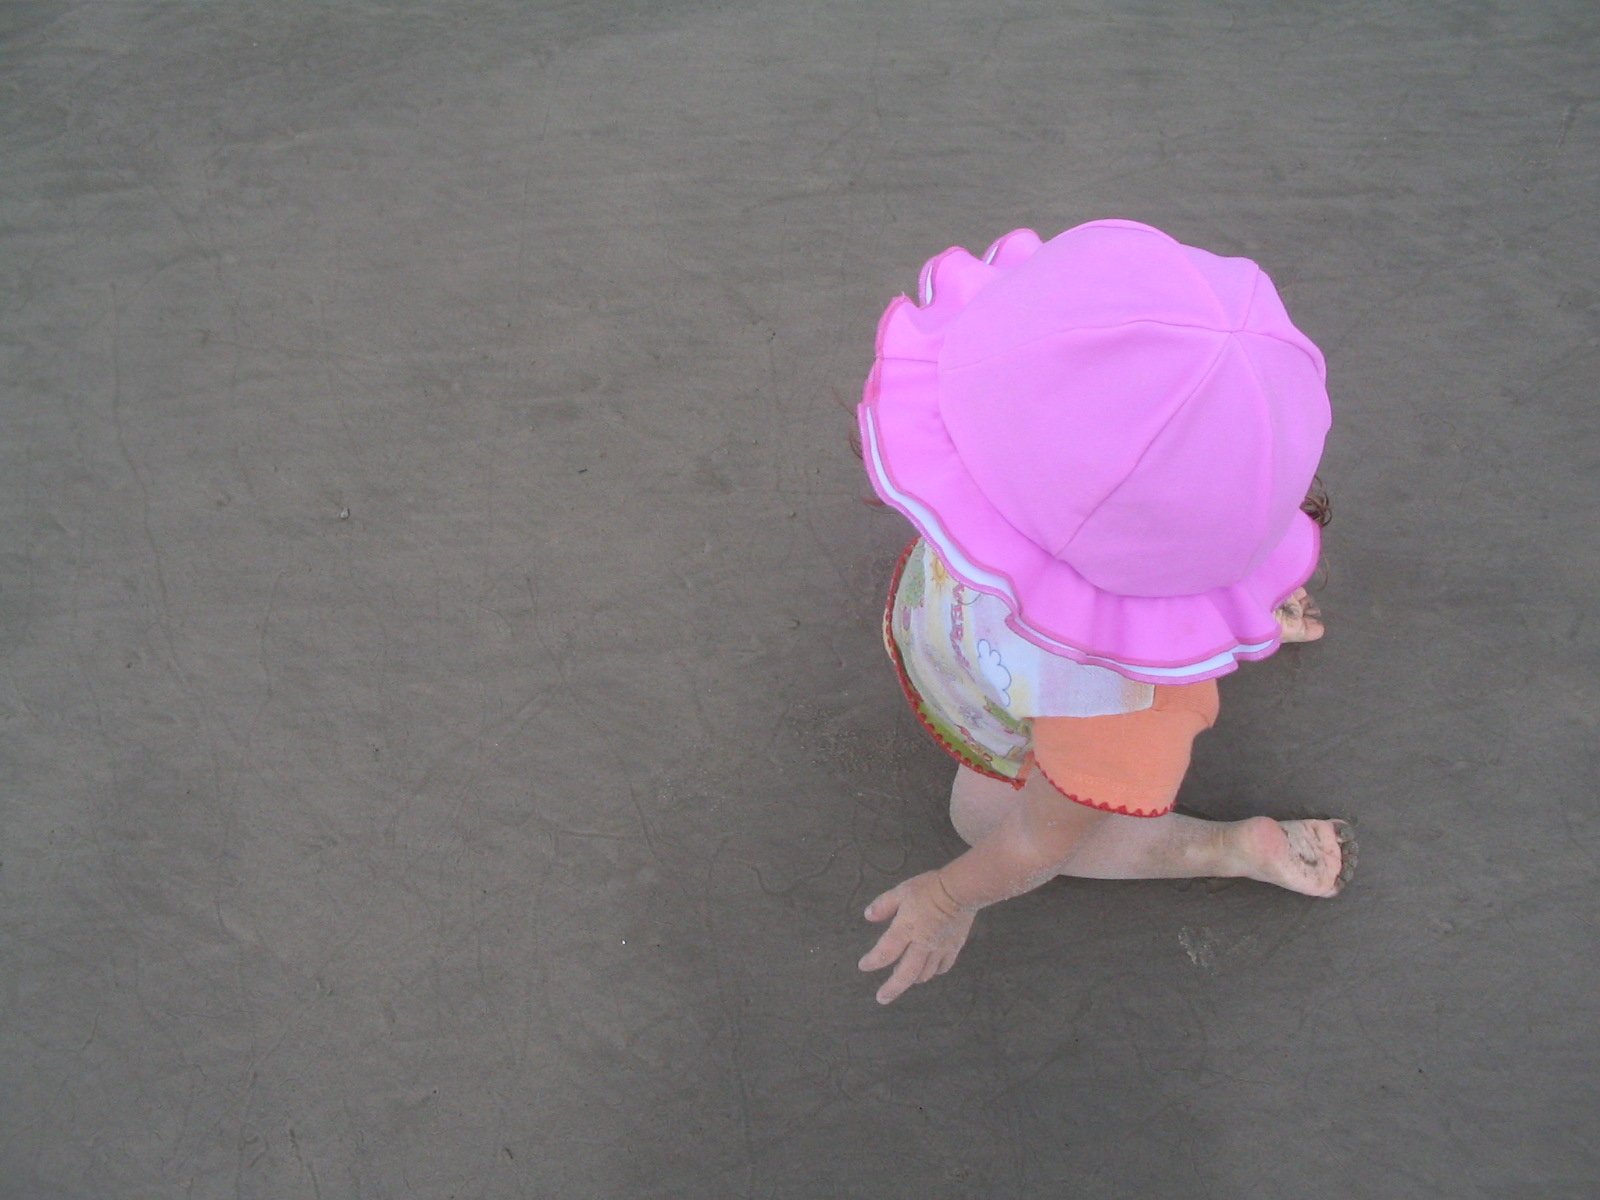 a small child in pink sitting on the ground